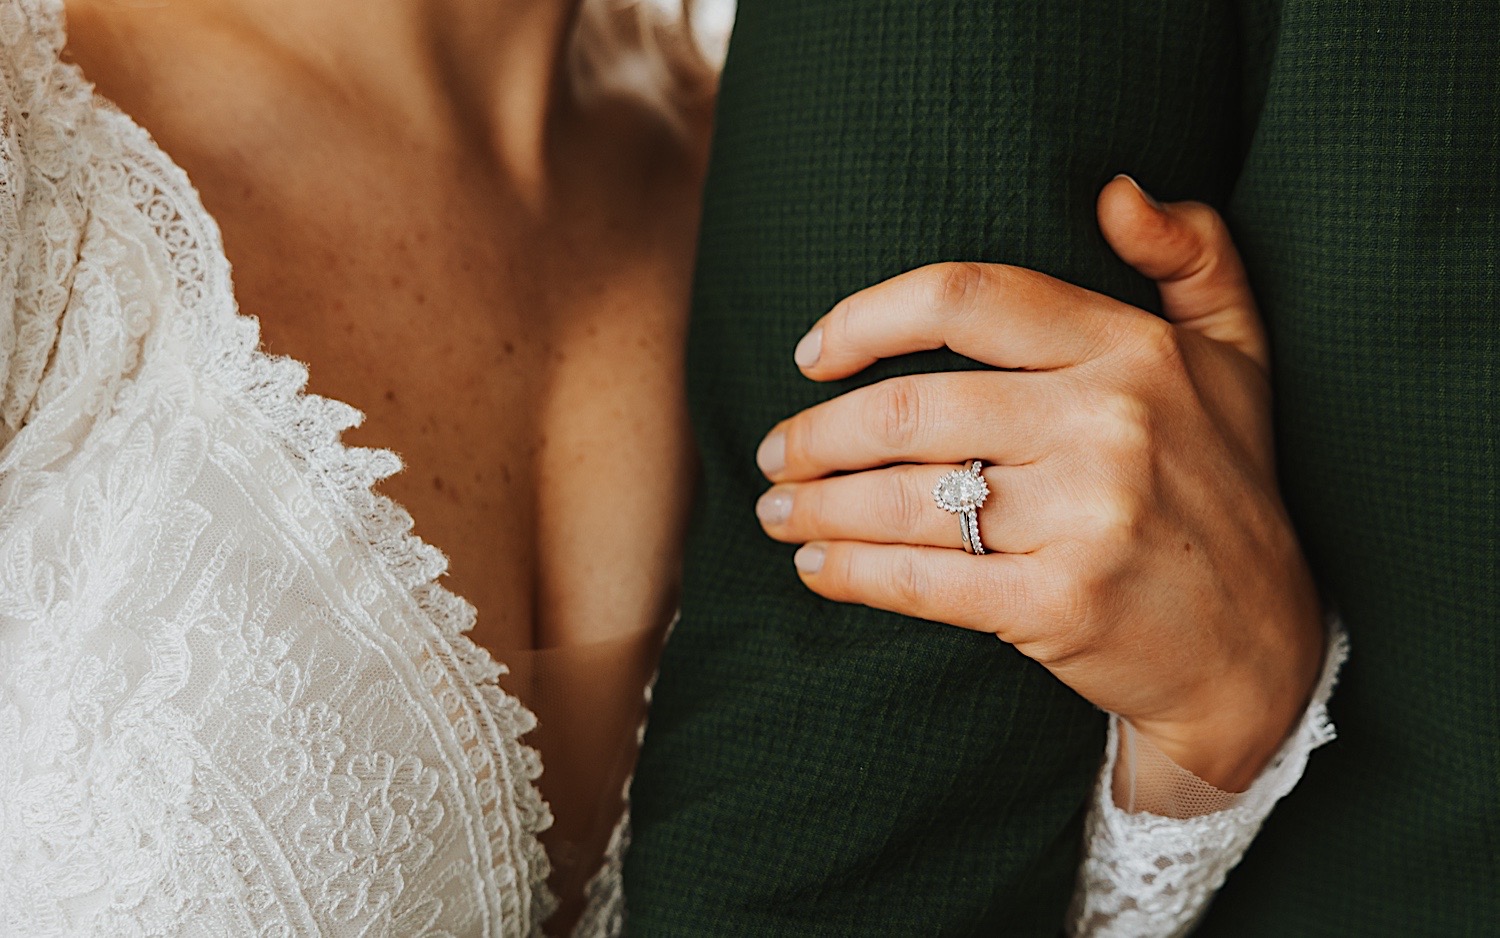 Close up photo of a bride's hand holding onto the arm of the groom showing off the ring on her finger